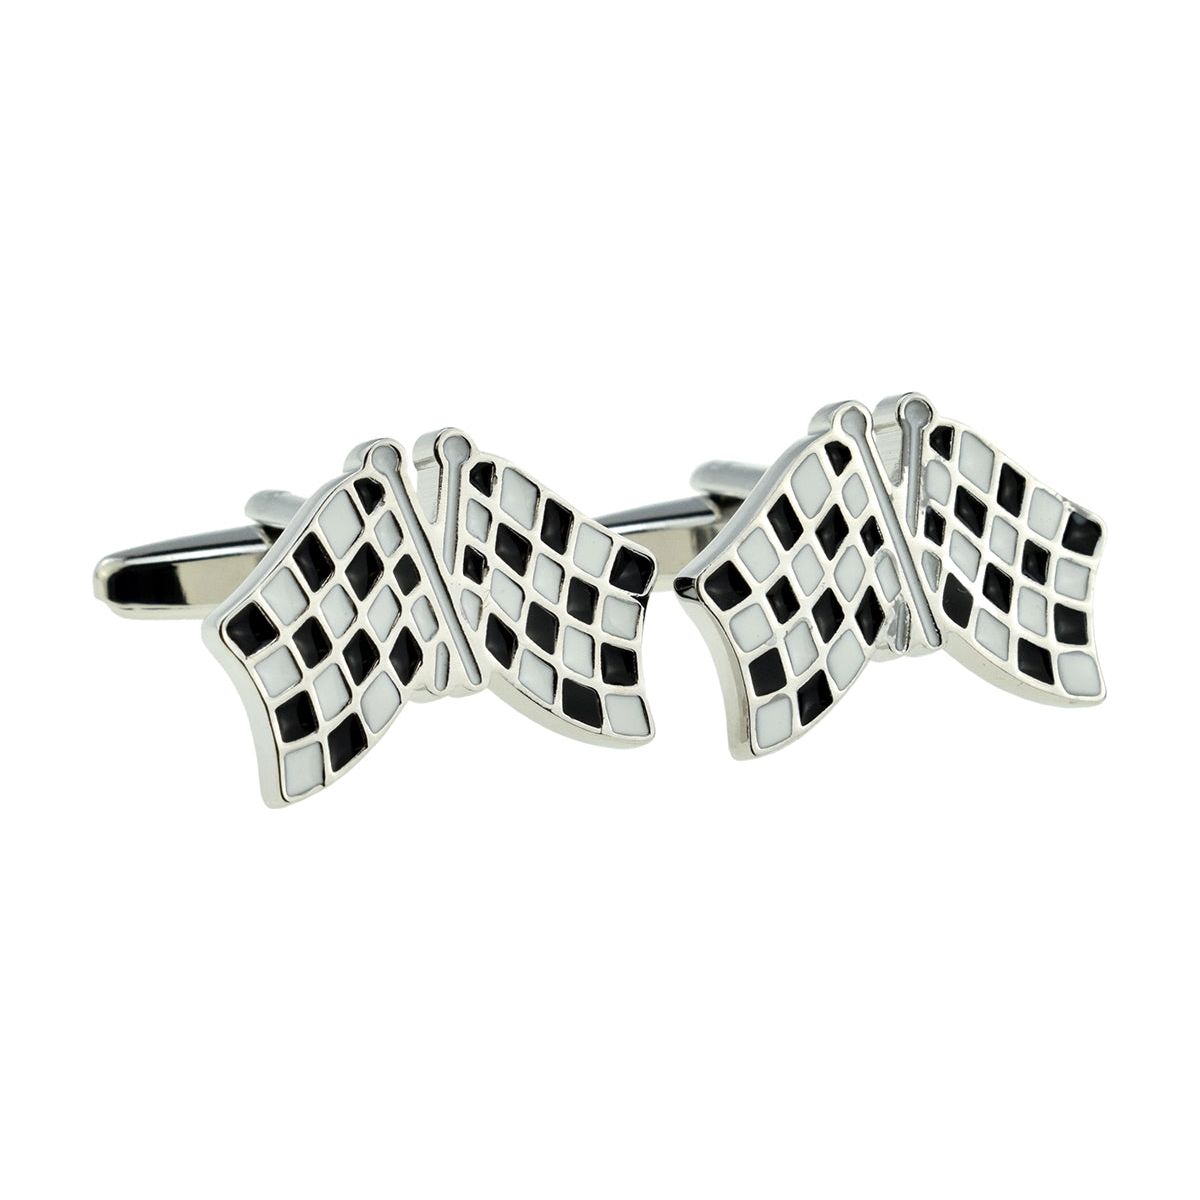 Two Chequered Flags Design Cufflinks - Ashton and Finch